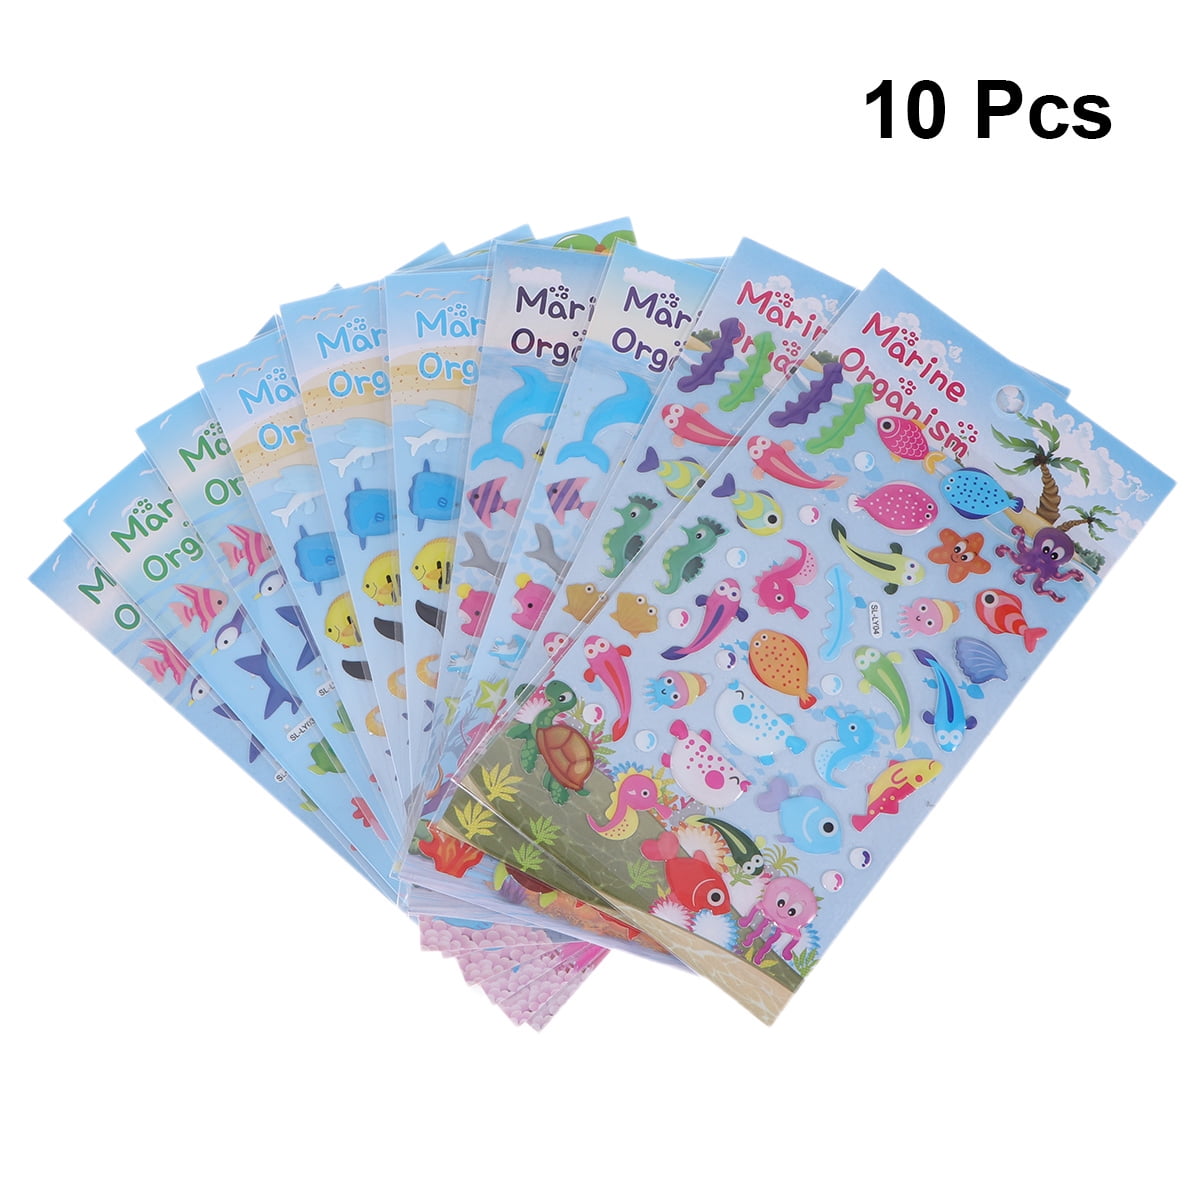 10 Sheets 3D Puffy Stickers Cartoon Marine Theme Fishes Scrapbooking  Crafting Assorted Stickers for Kids 